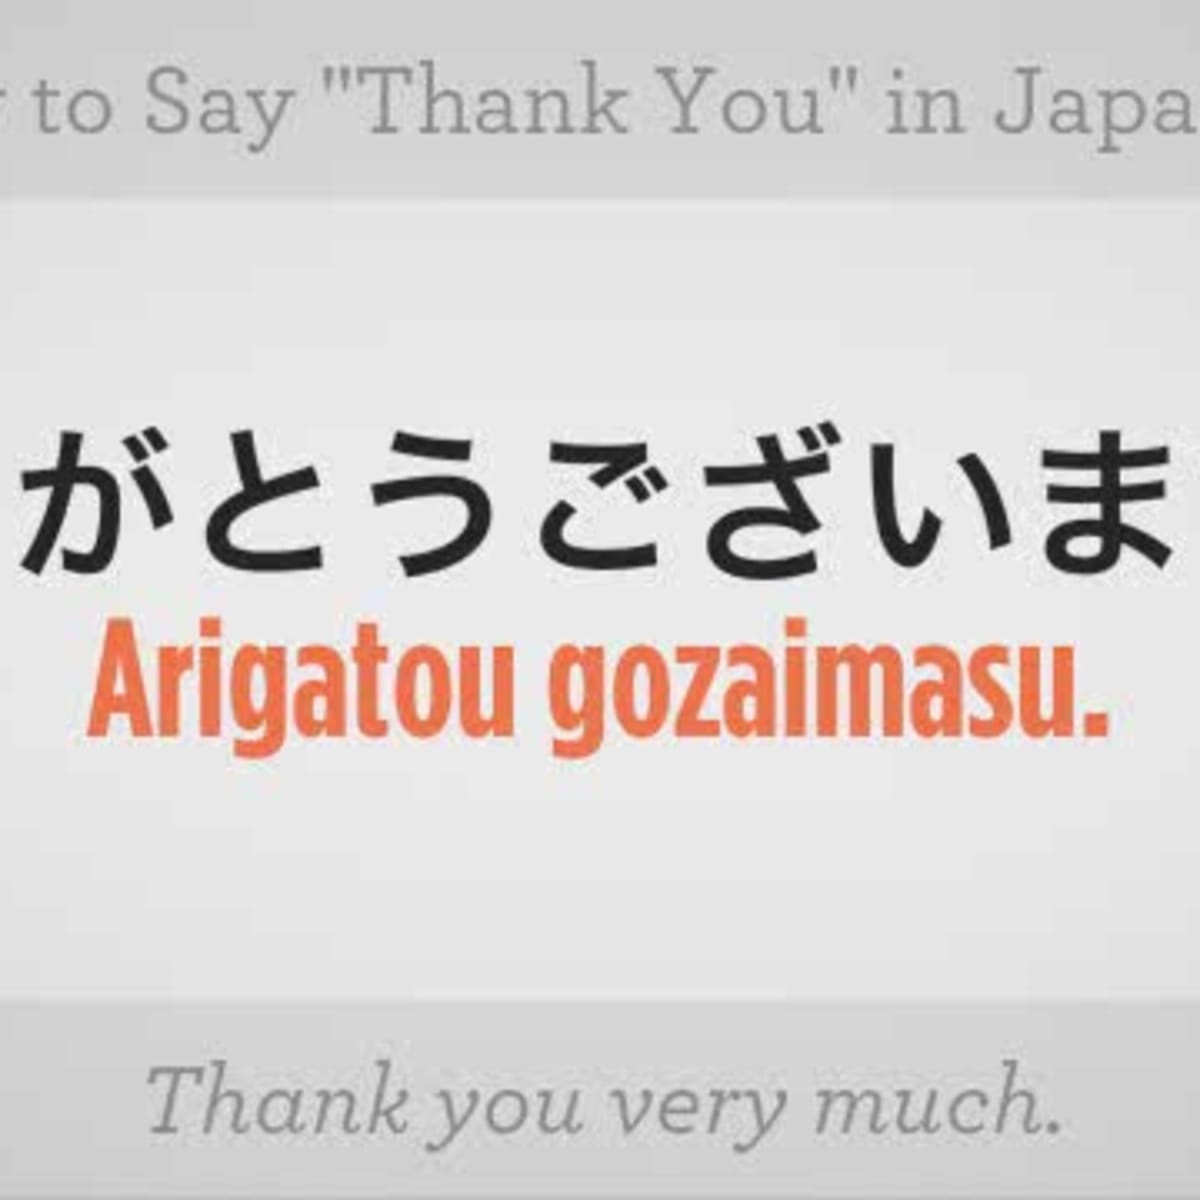 How to Say "Thank You" in Japanese - Howcast